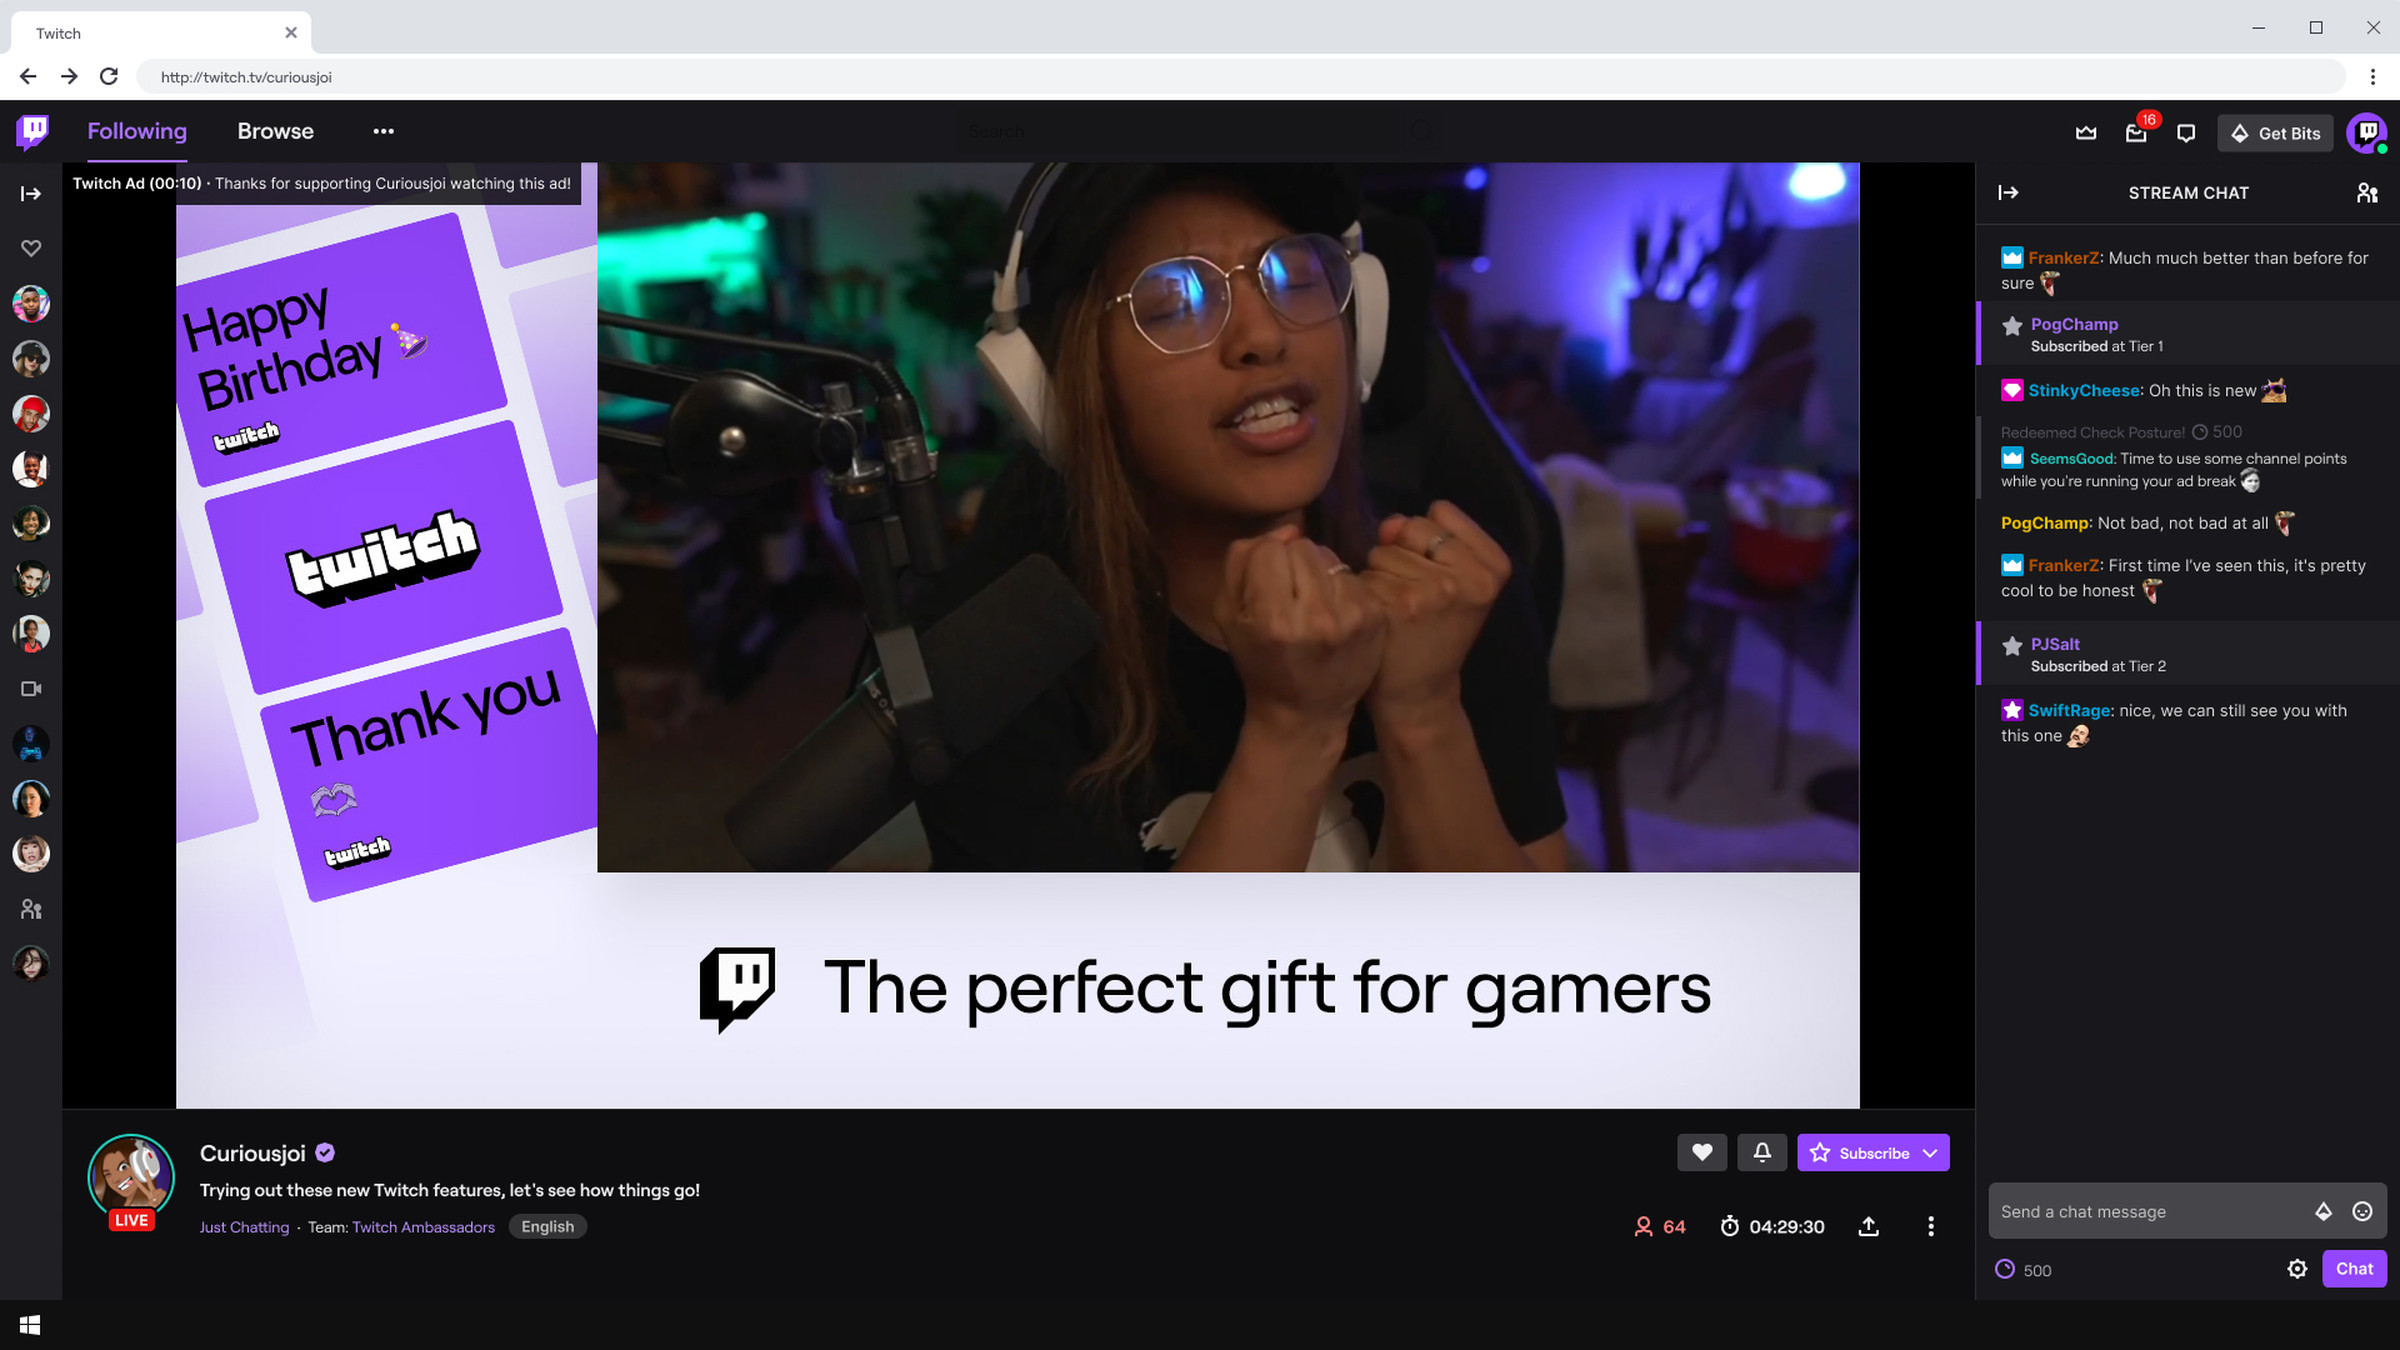 The new Twitch ads can also occupy more screen real estate.